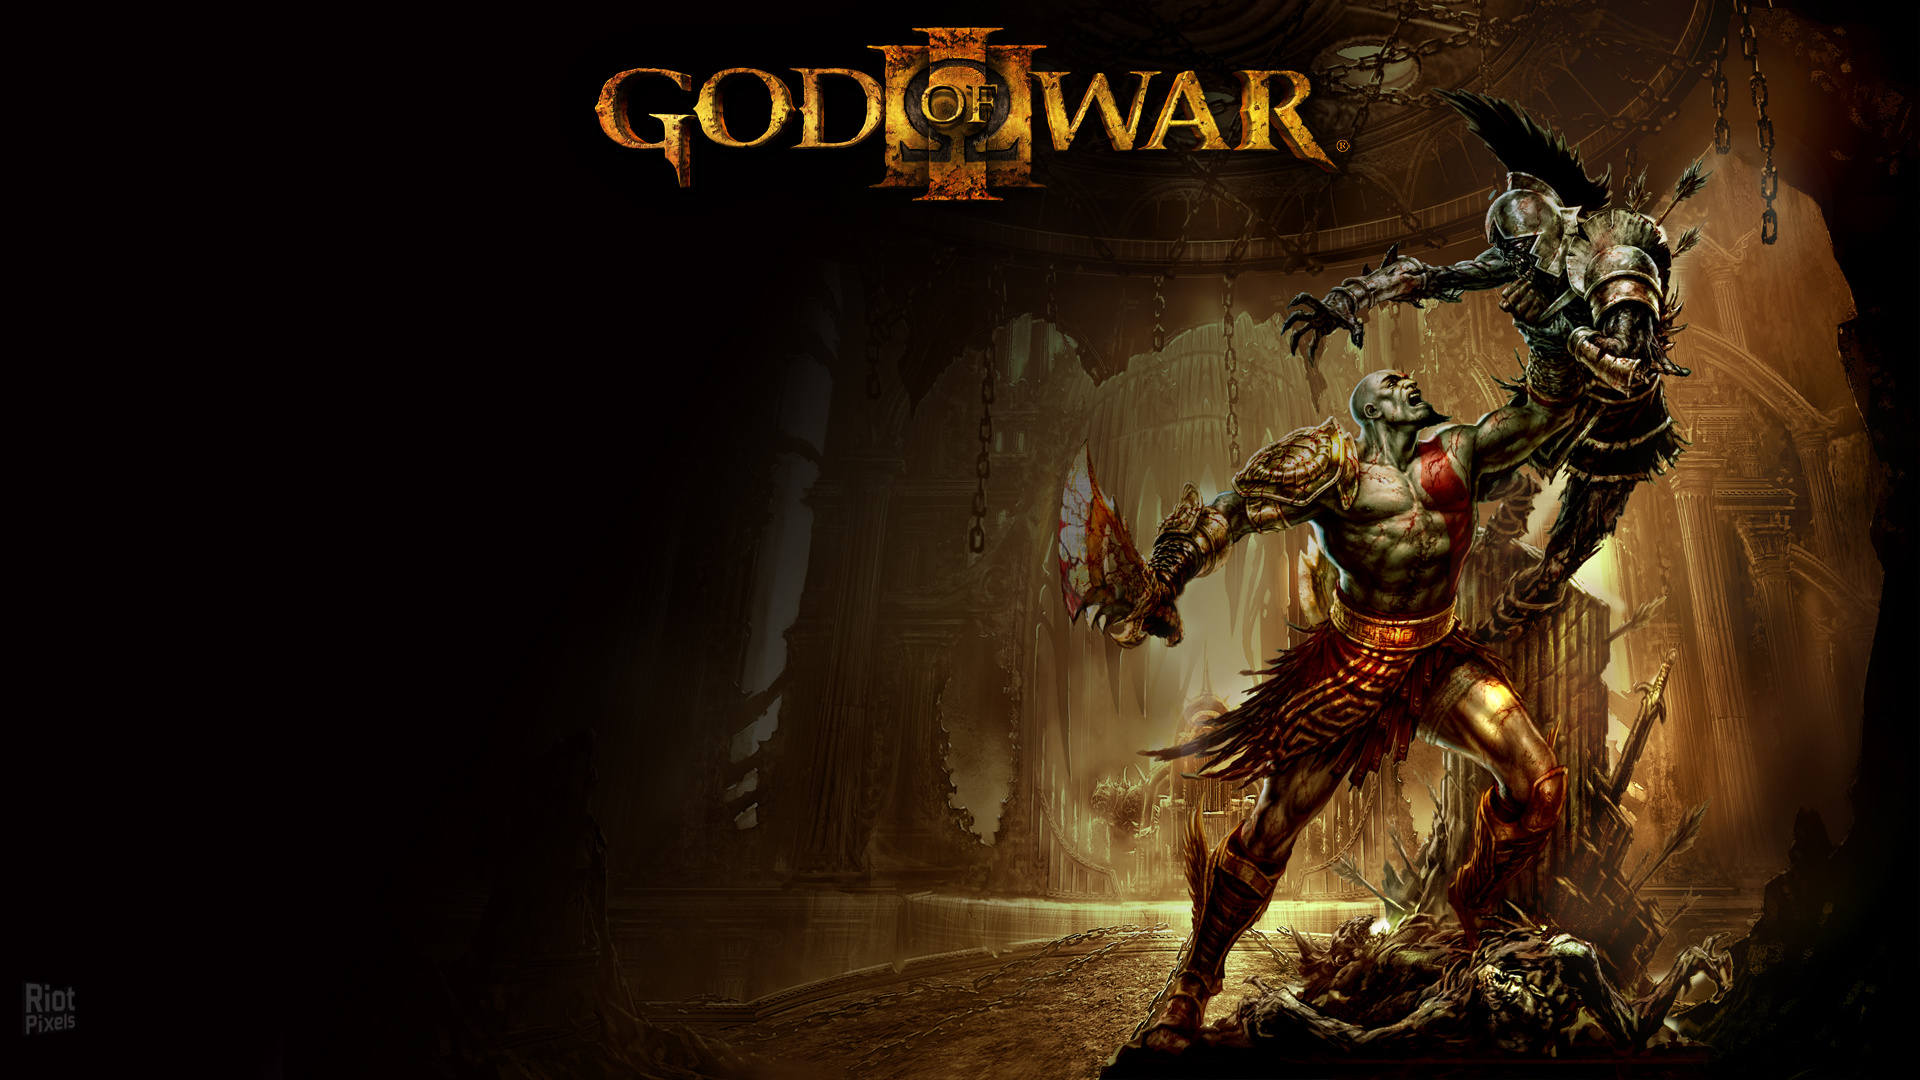 god of war 3 pc game highly compressed free download